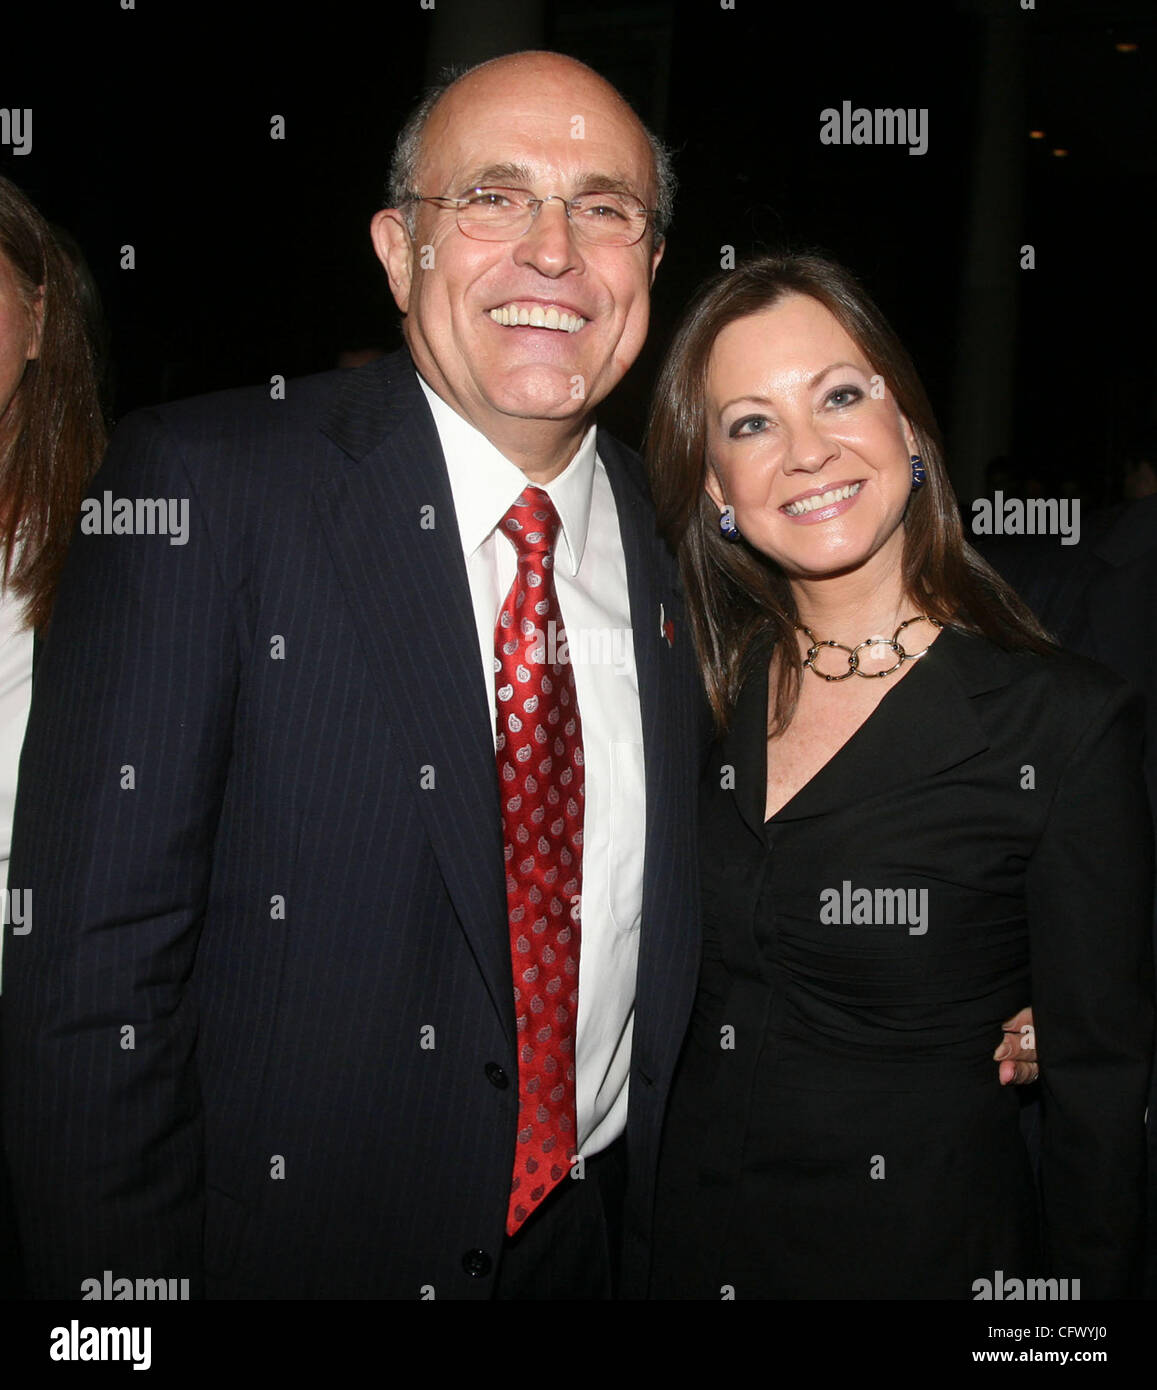 Mar 14, 2007; New York, NY, USA; Possible Presidential candidate and former NYC Mayor RUDY GIULIANI and his wife  JUDITH NATHAN GIULIANI at a campaign fundraiser held at the Sheraton New York. Mandatory Credit: Photo by Nancy Kaszerman/ZUMA Press. (©) Copyright 2007 by Nancy Kaszerman Stock Photo